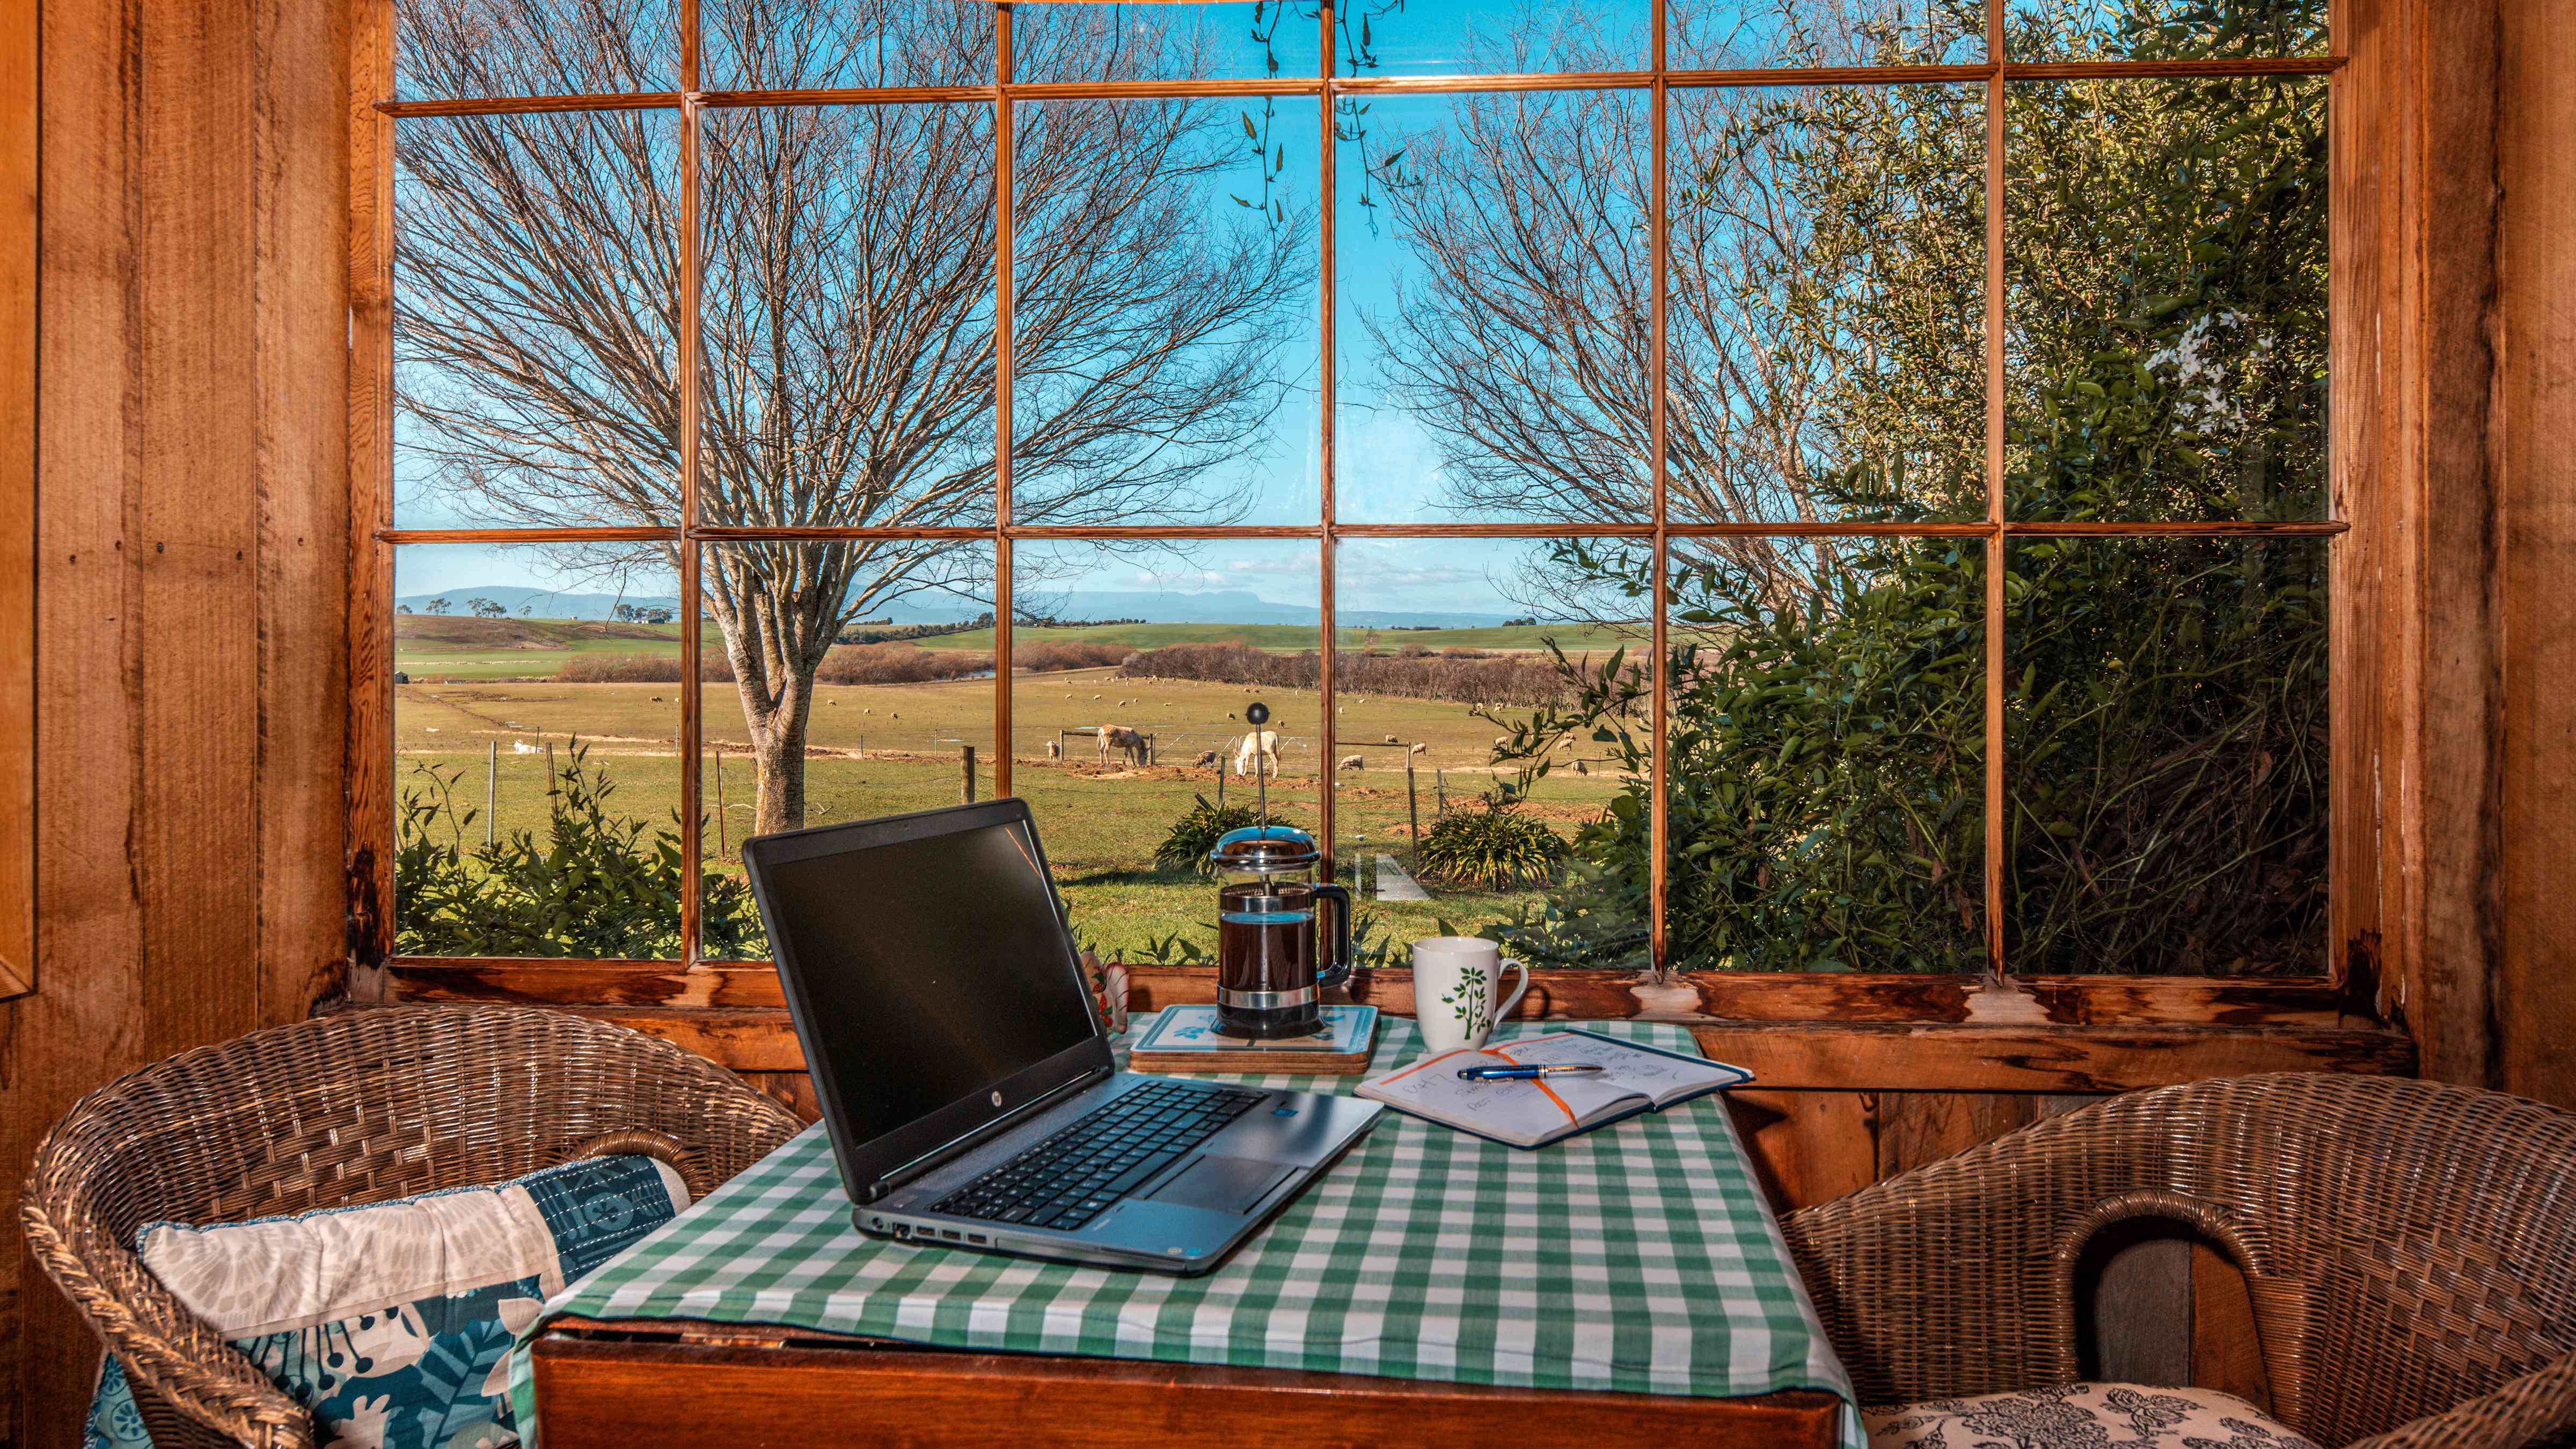 A large paned window looks out to a couple of trees and fields with farm animals. A table has a green and white checked tablecloth and a computer, coffee plunger, mug and book sit on the table. Two wicker chairs sit on either side of the table. Photo: Rob Burnett.